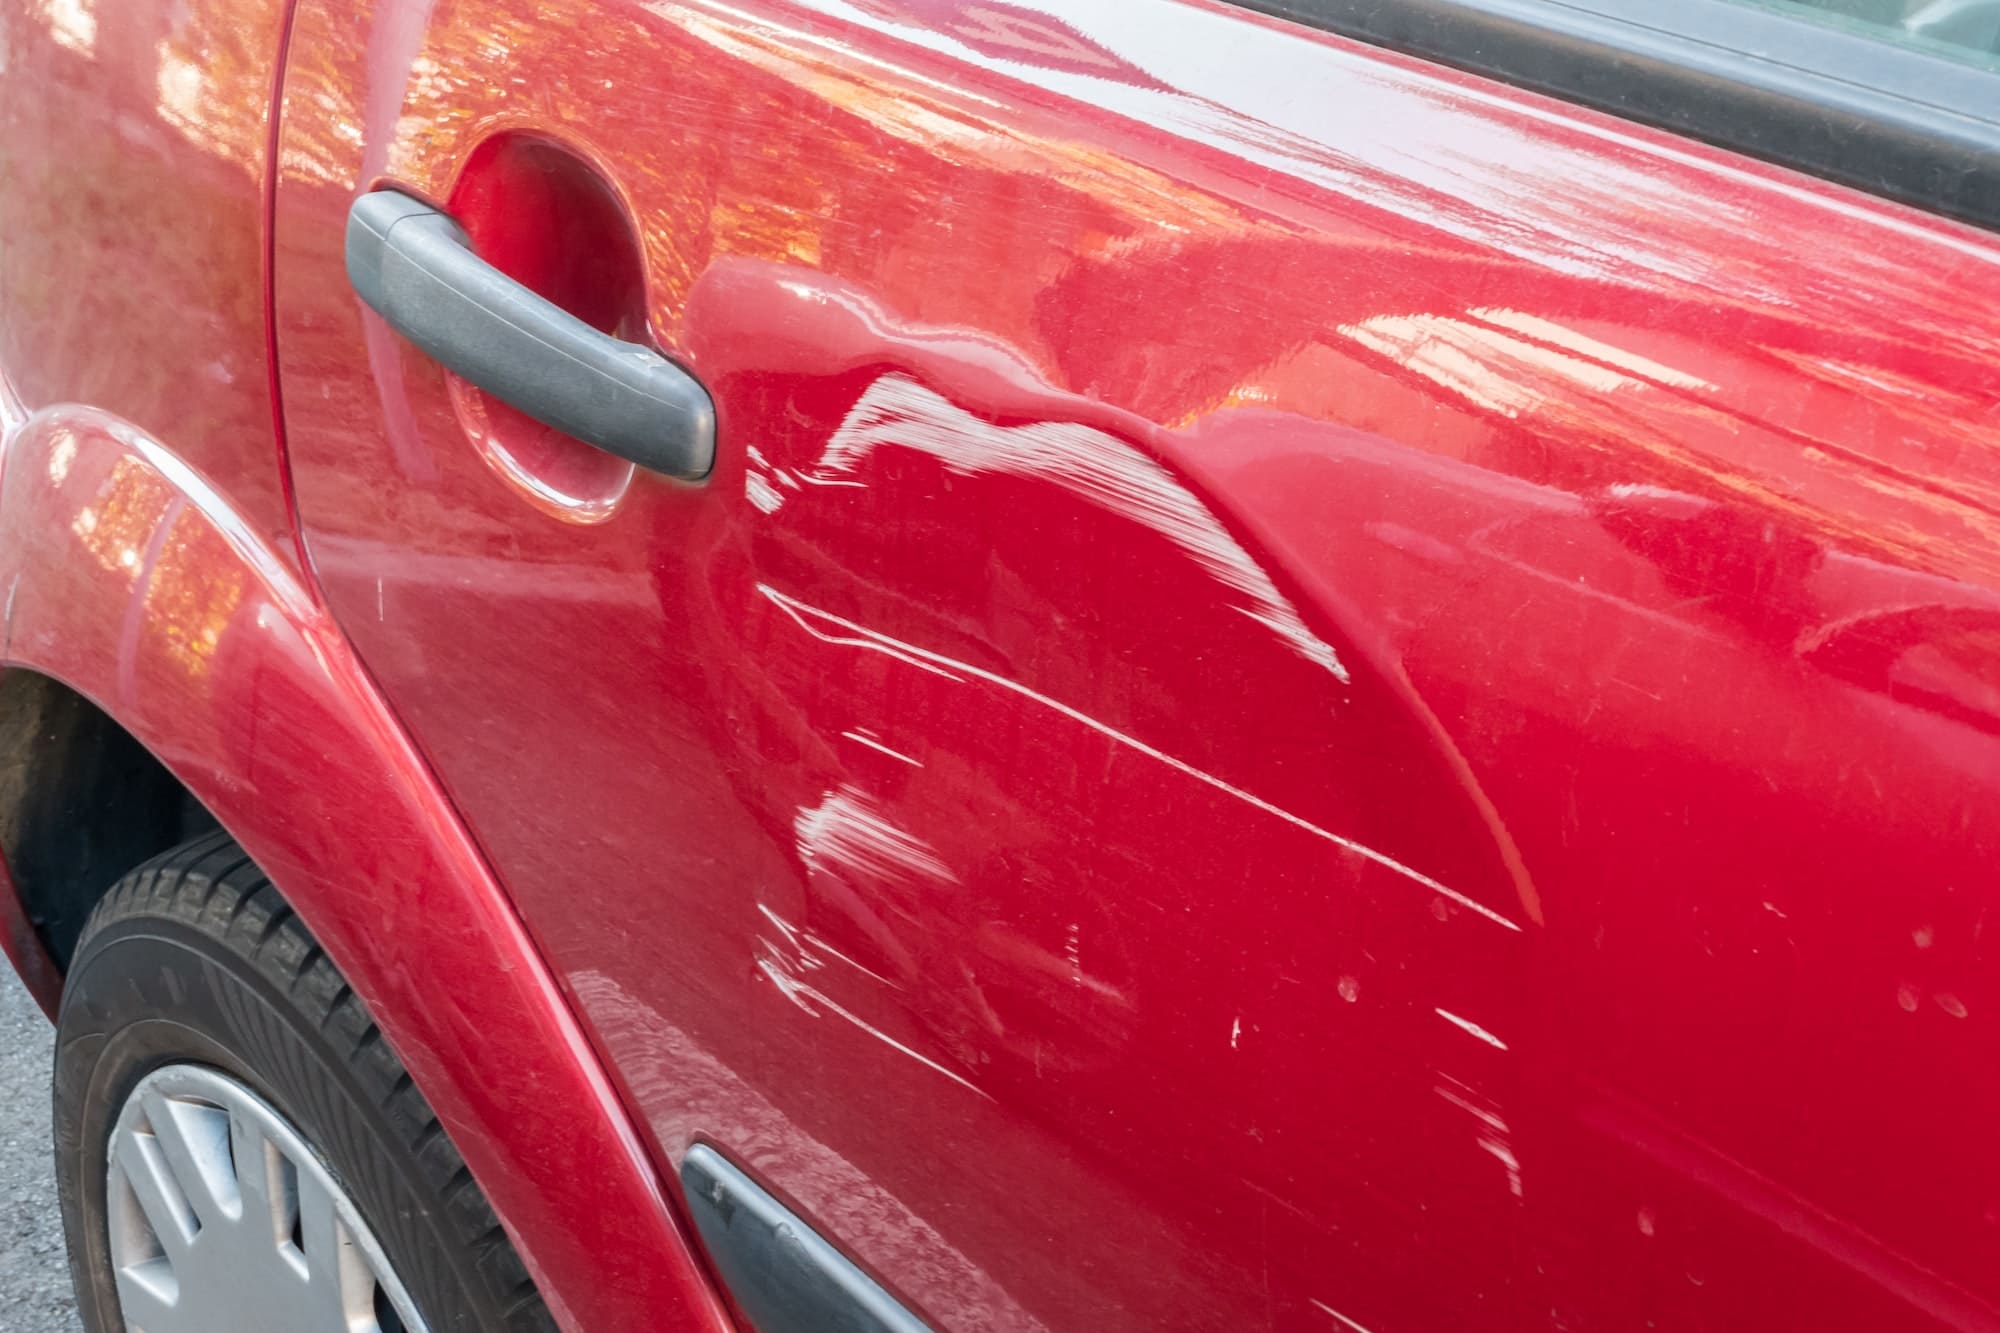 Scratches on the side door of the red car. Collision or accident.